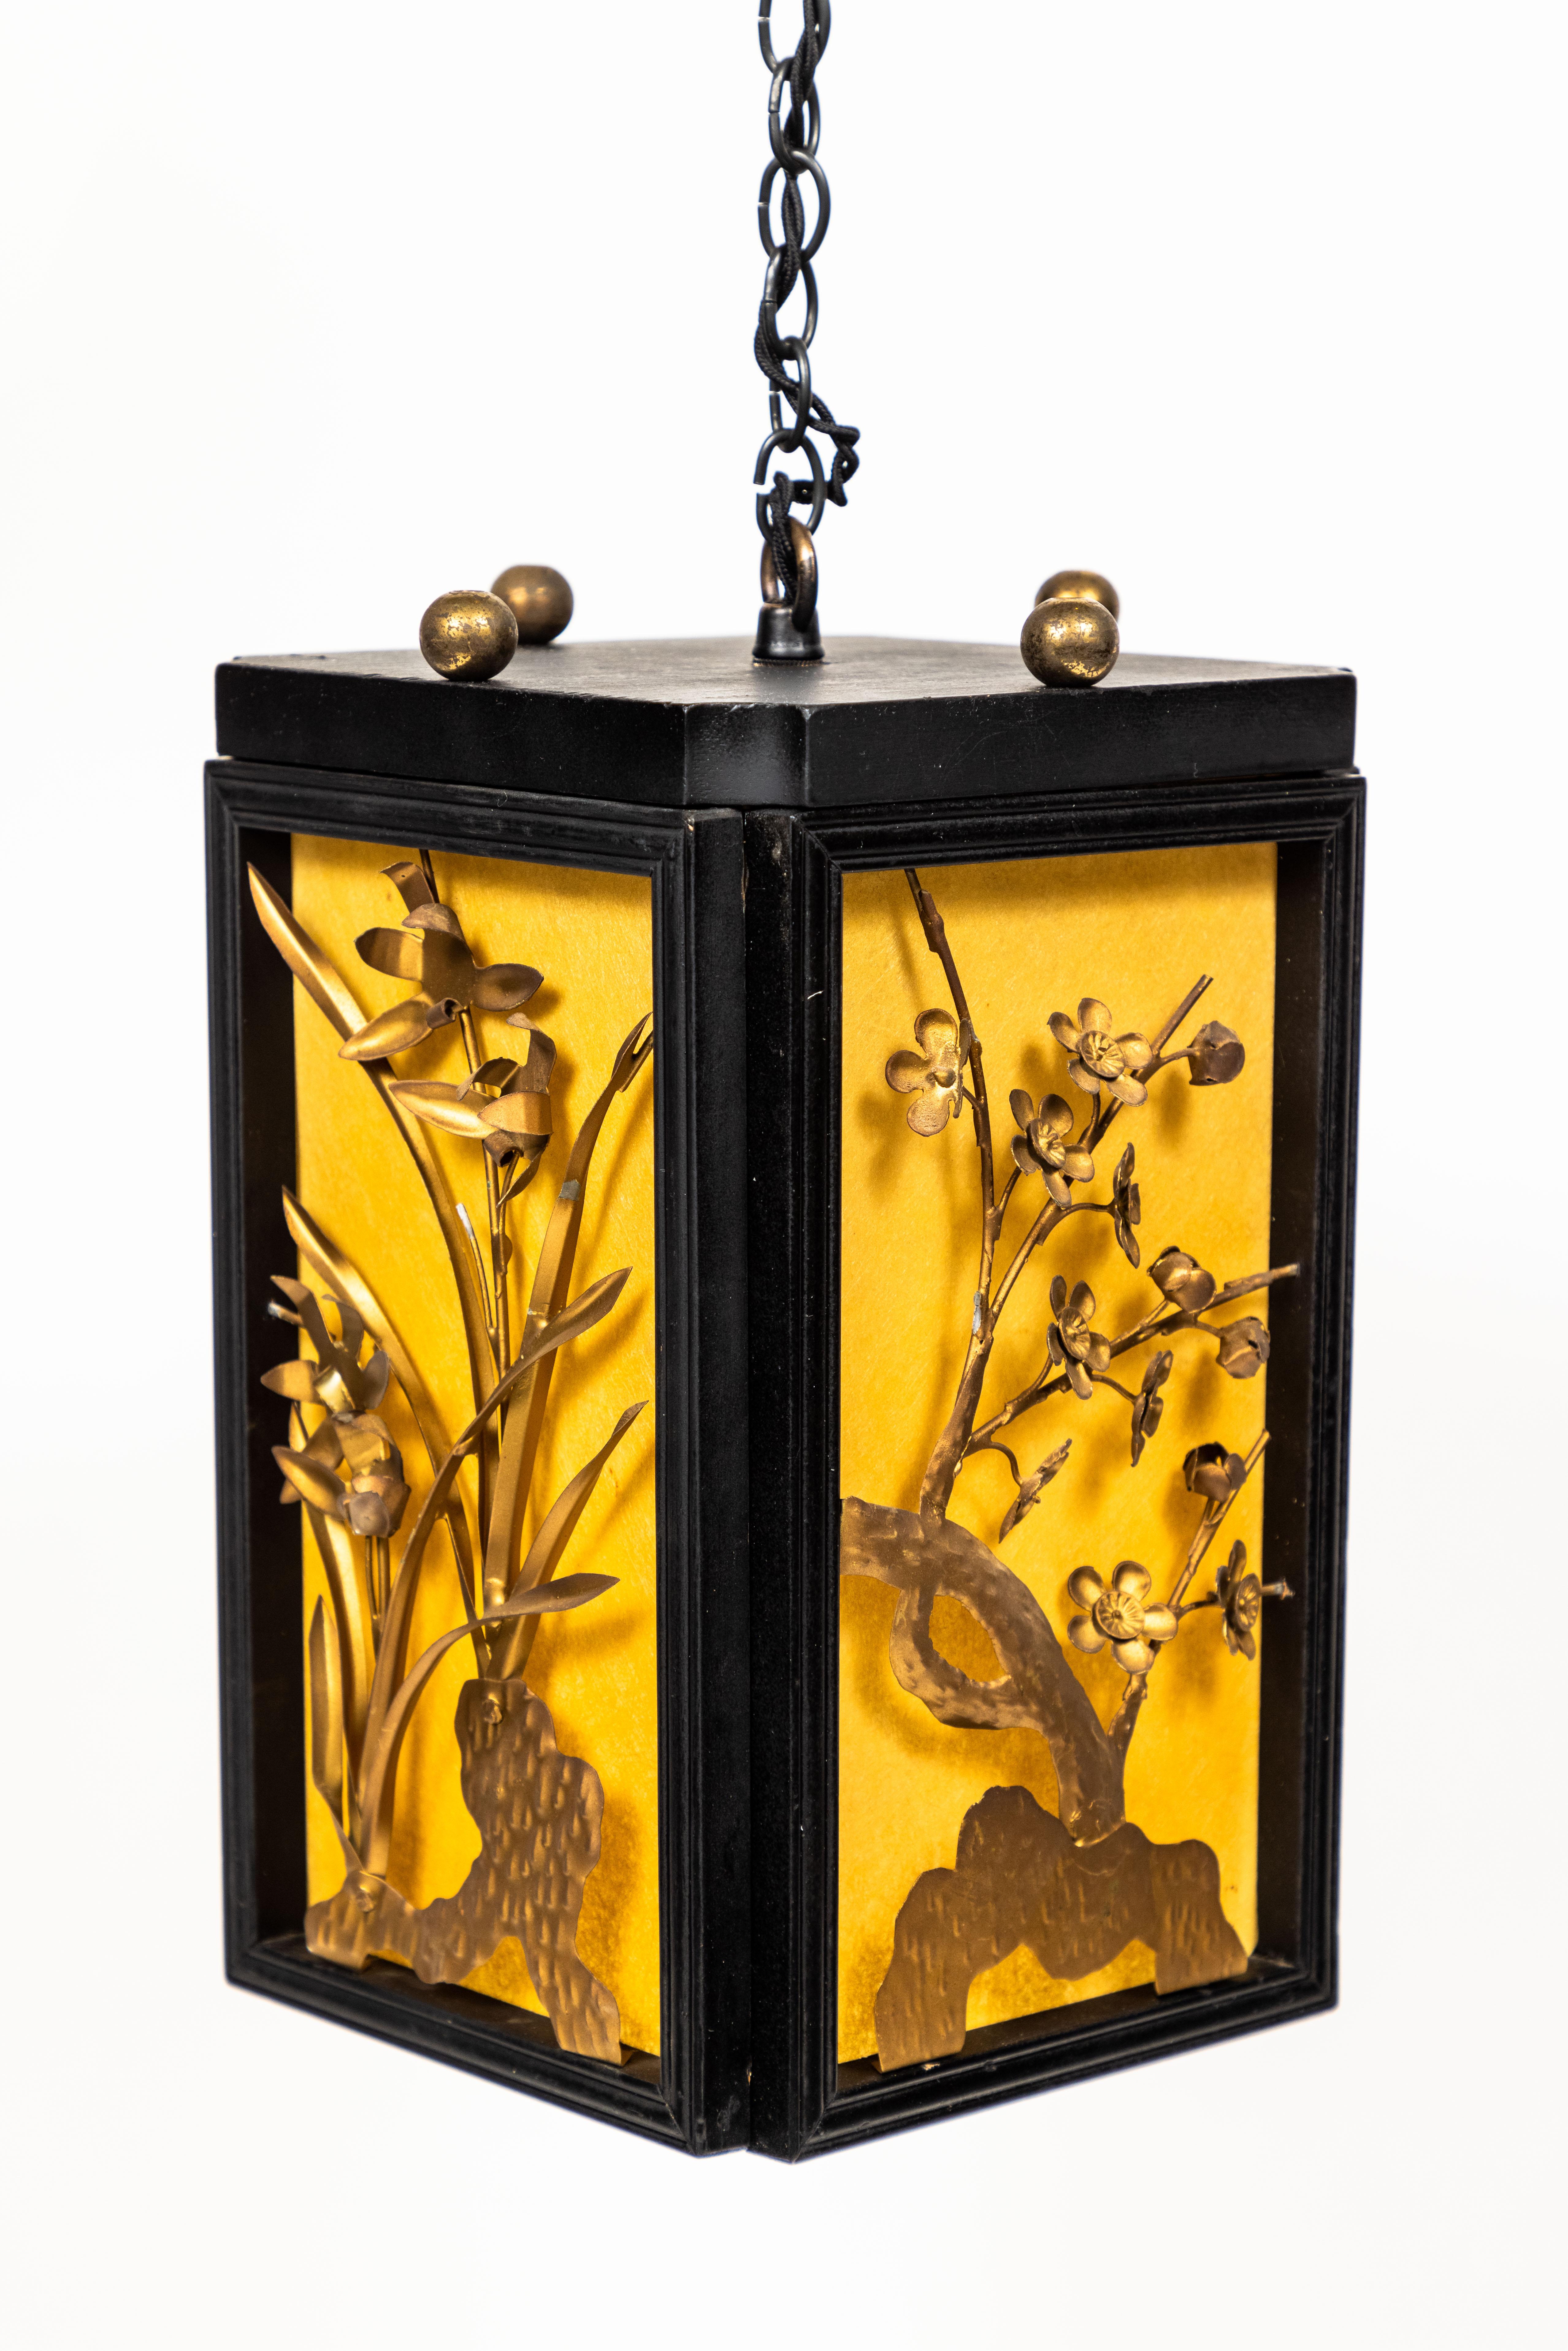 Vintage hanging chinoiserie lantern with black wood frame, natural parchment side panels and gold metal floral motif.

Newly rewired.

Measures: 7